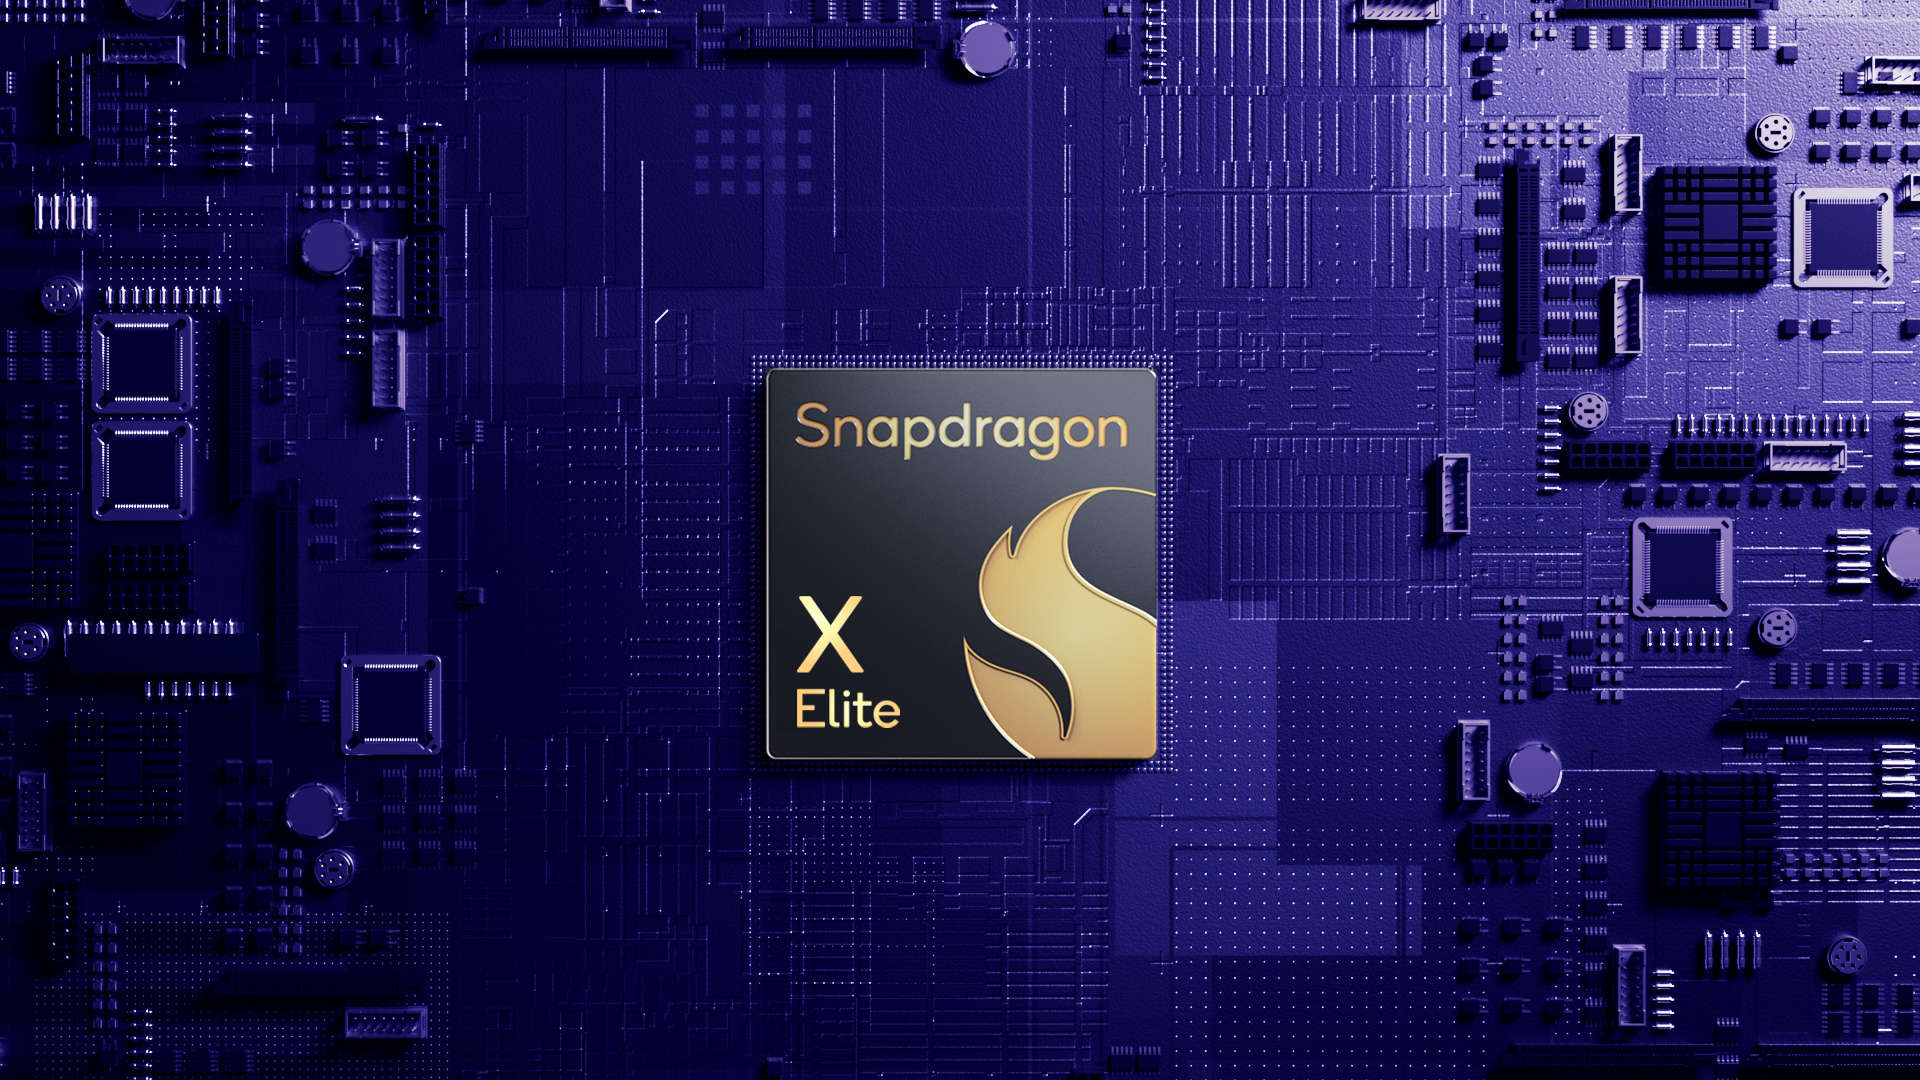 Qualcomm Snapdragon X Elite Announced: Outperforms Intel Core i7 on Geekbench 6 & Ryzen 9 7940HS on GPU benchmarks